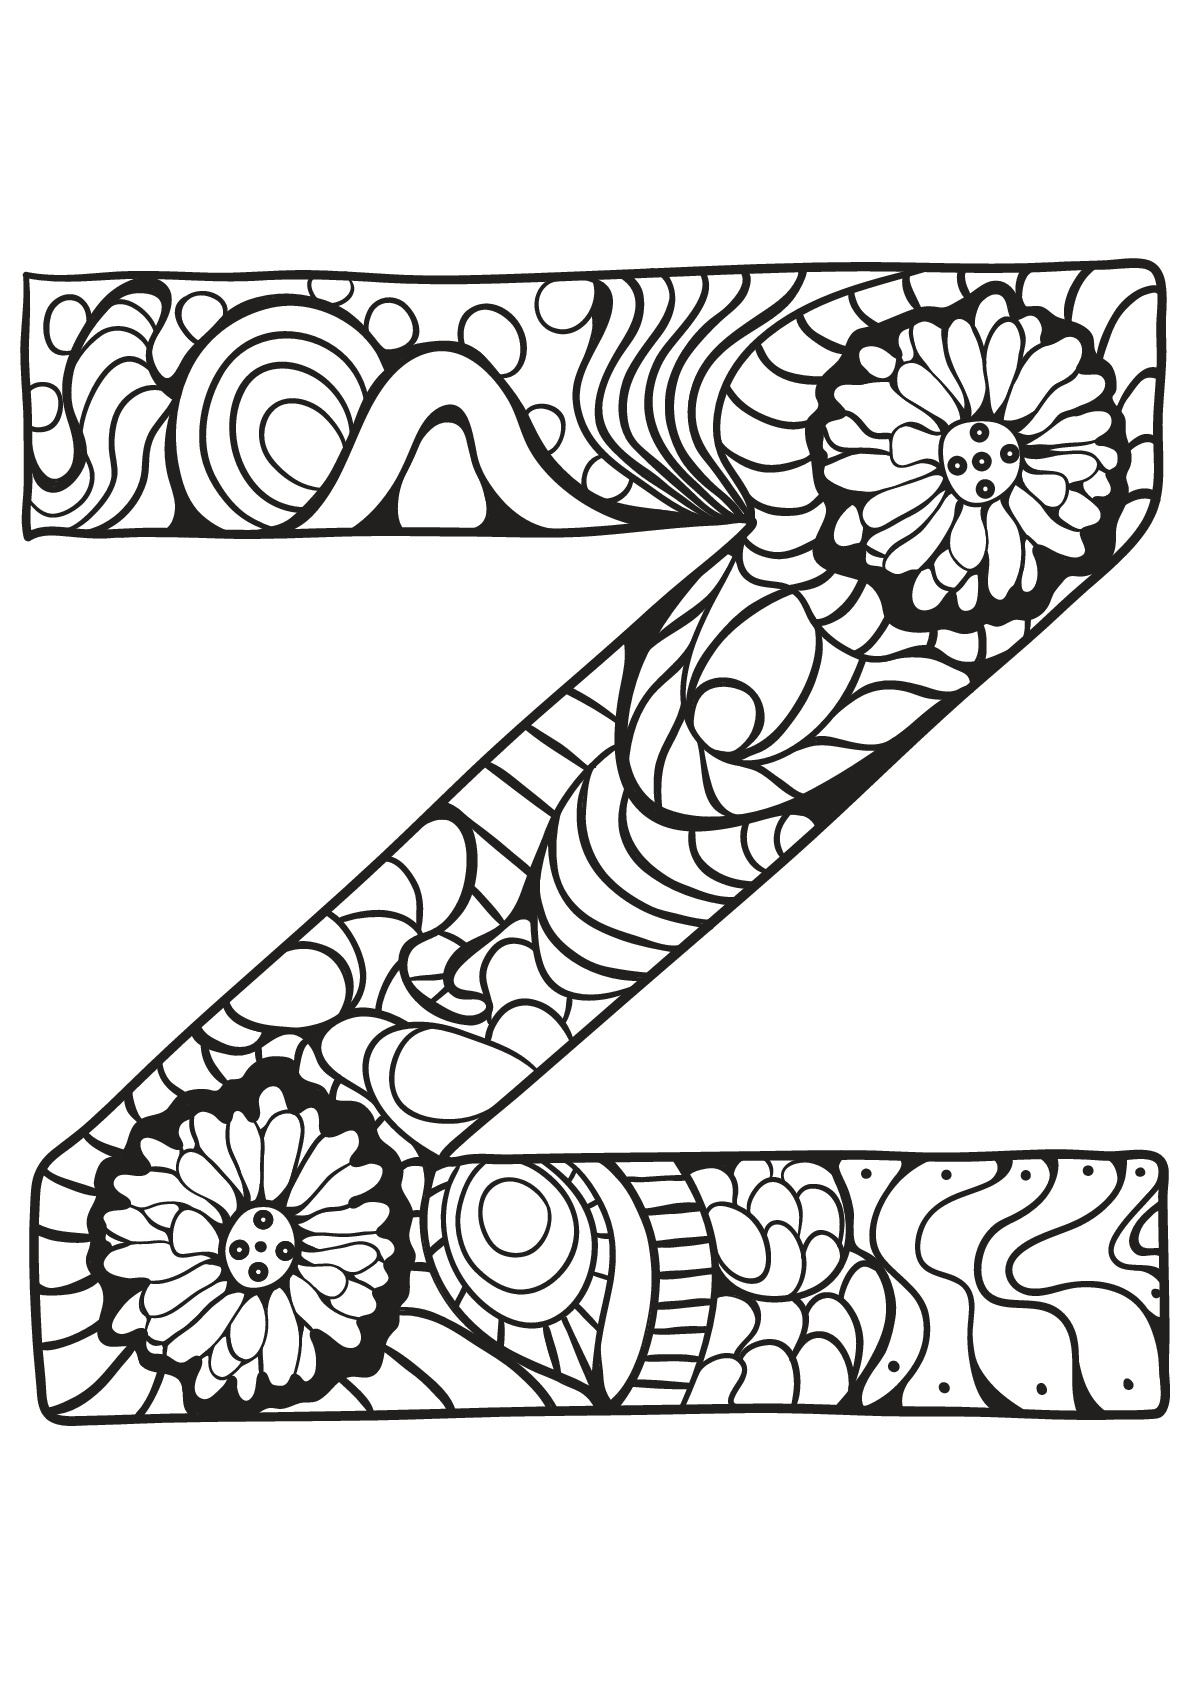 Download Alphabet free to color for kids : Z - Alphabet Kids Coloring Pages